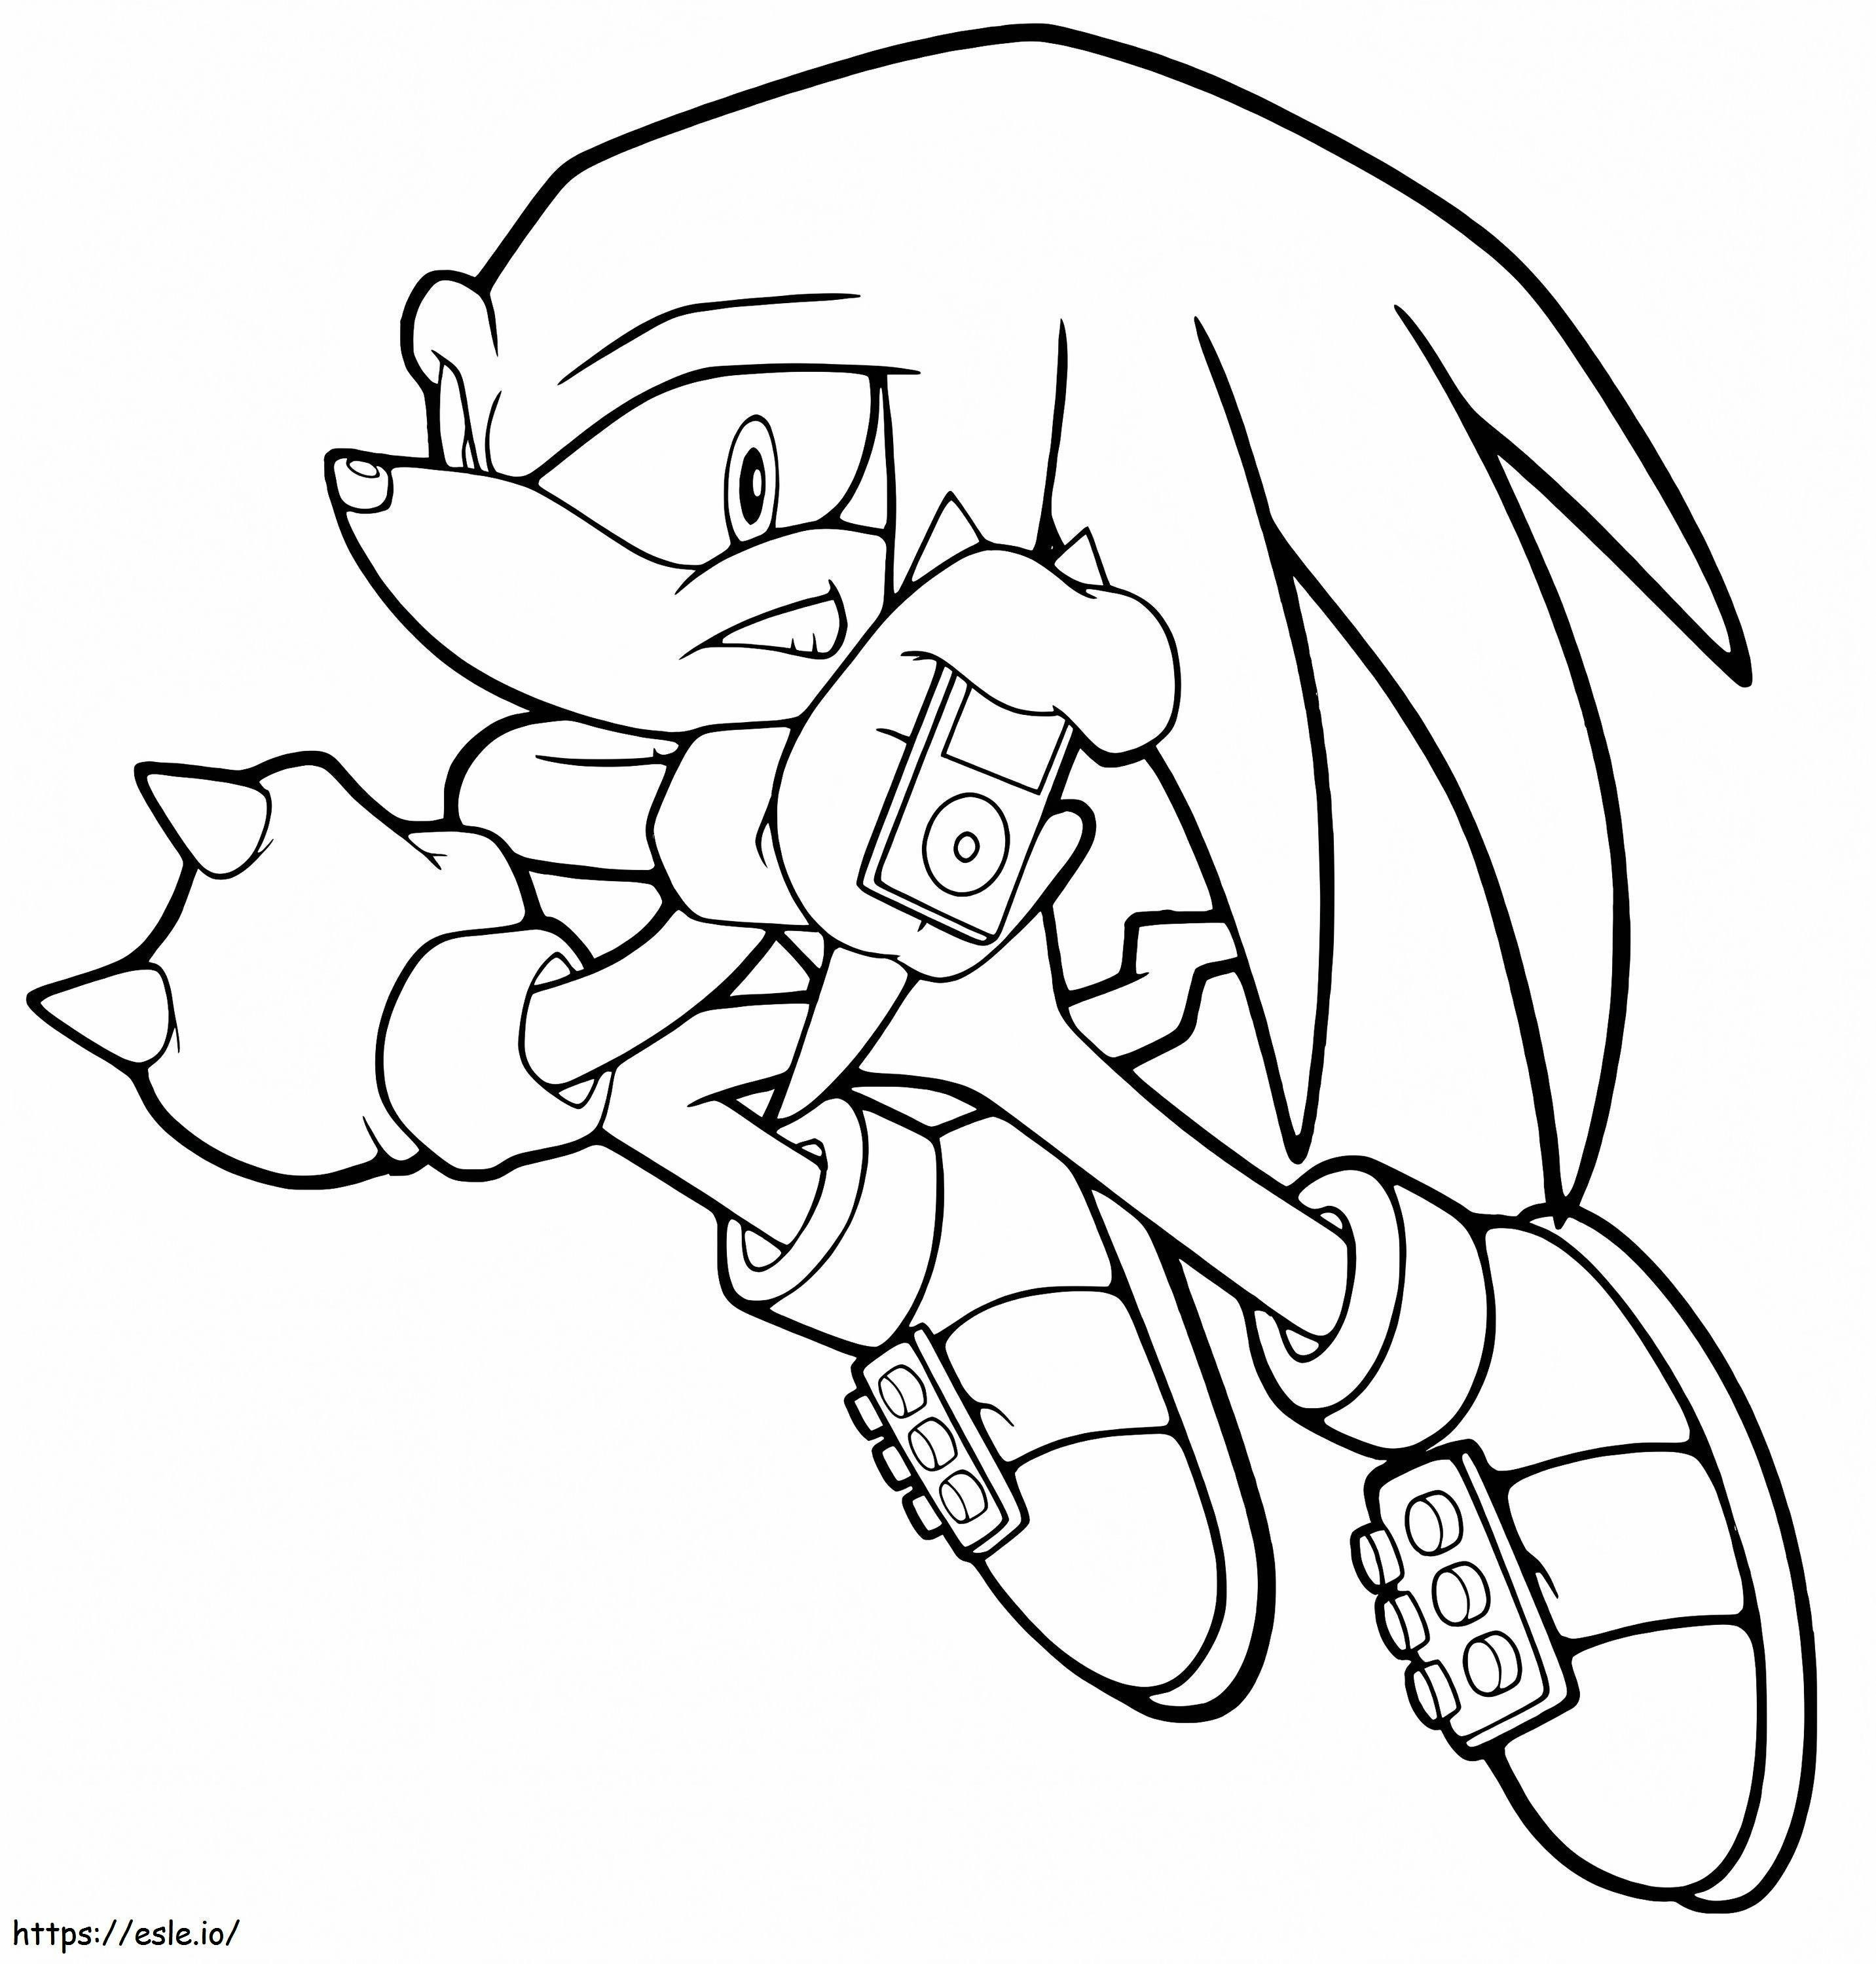 Action Knuckles The Echidna coloring page